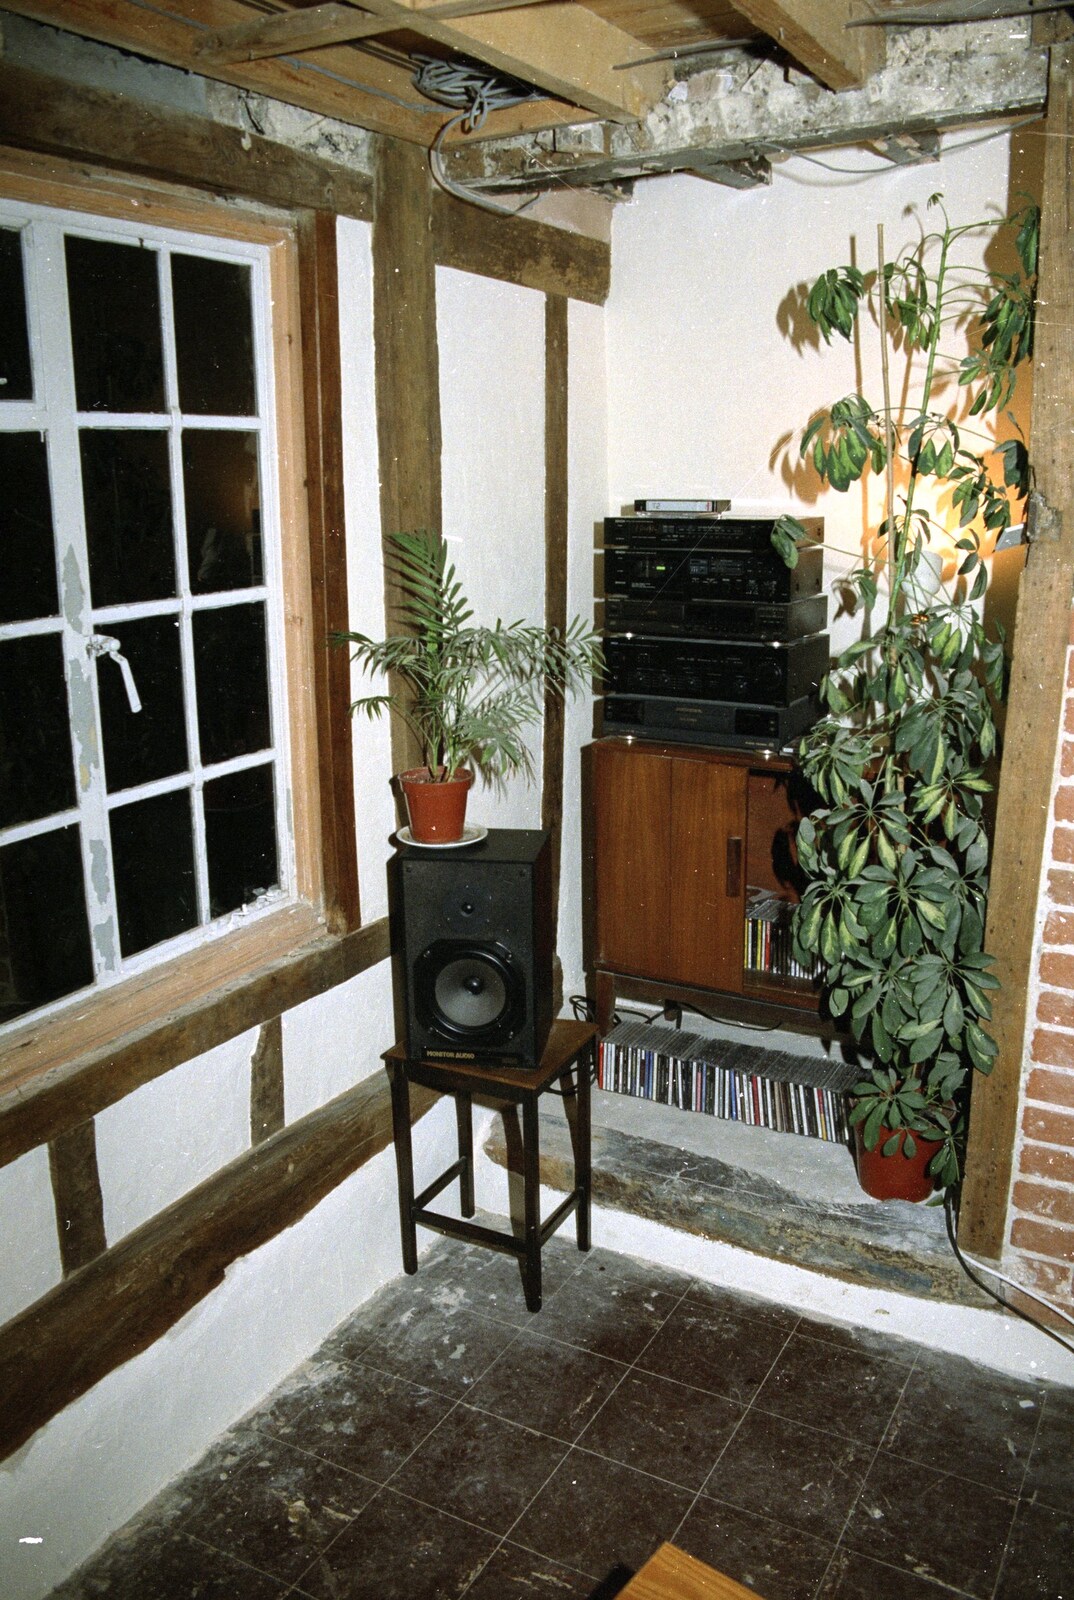 Grandmother's Seventieth Birthday, Brockenhurst and Keyhaven, Hampshire - 11th September 1994: A stack of stereo